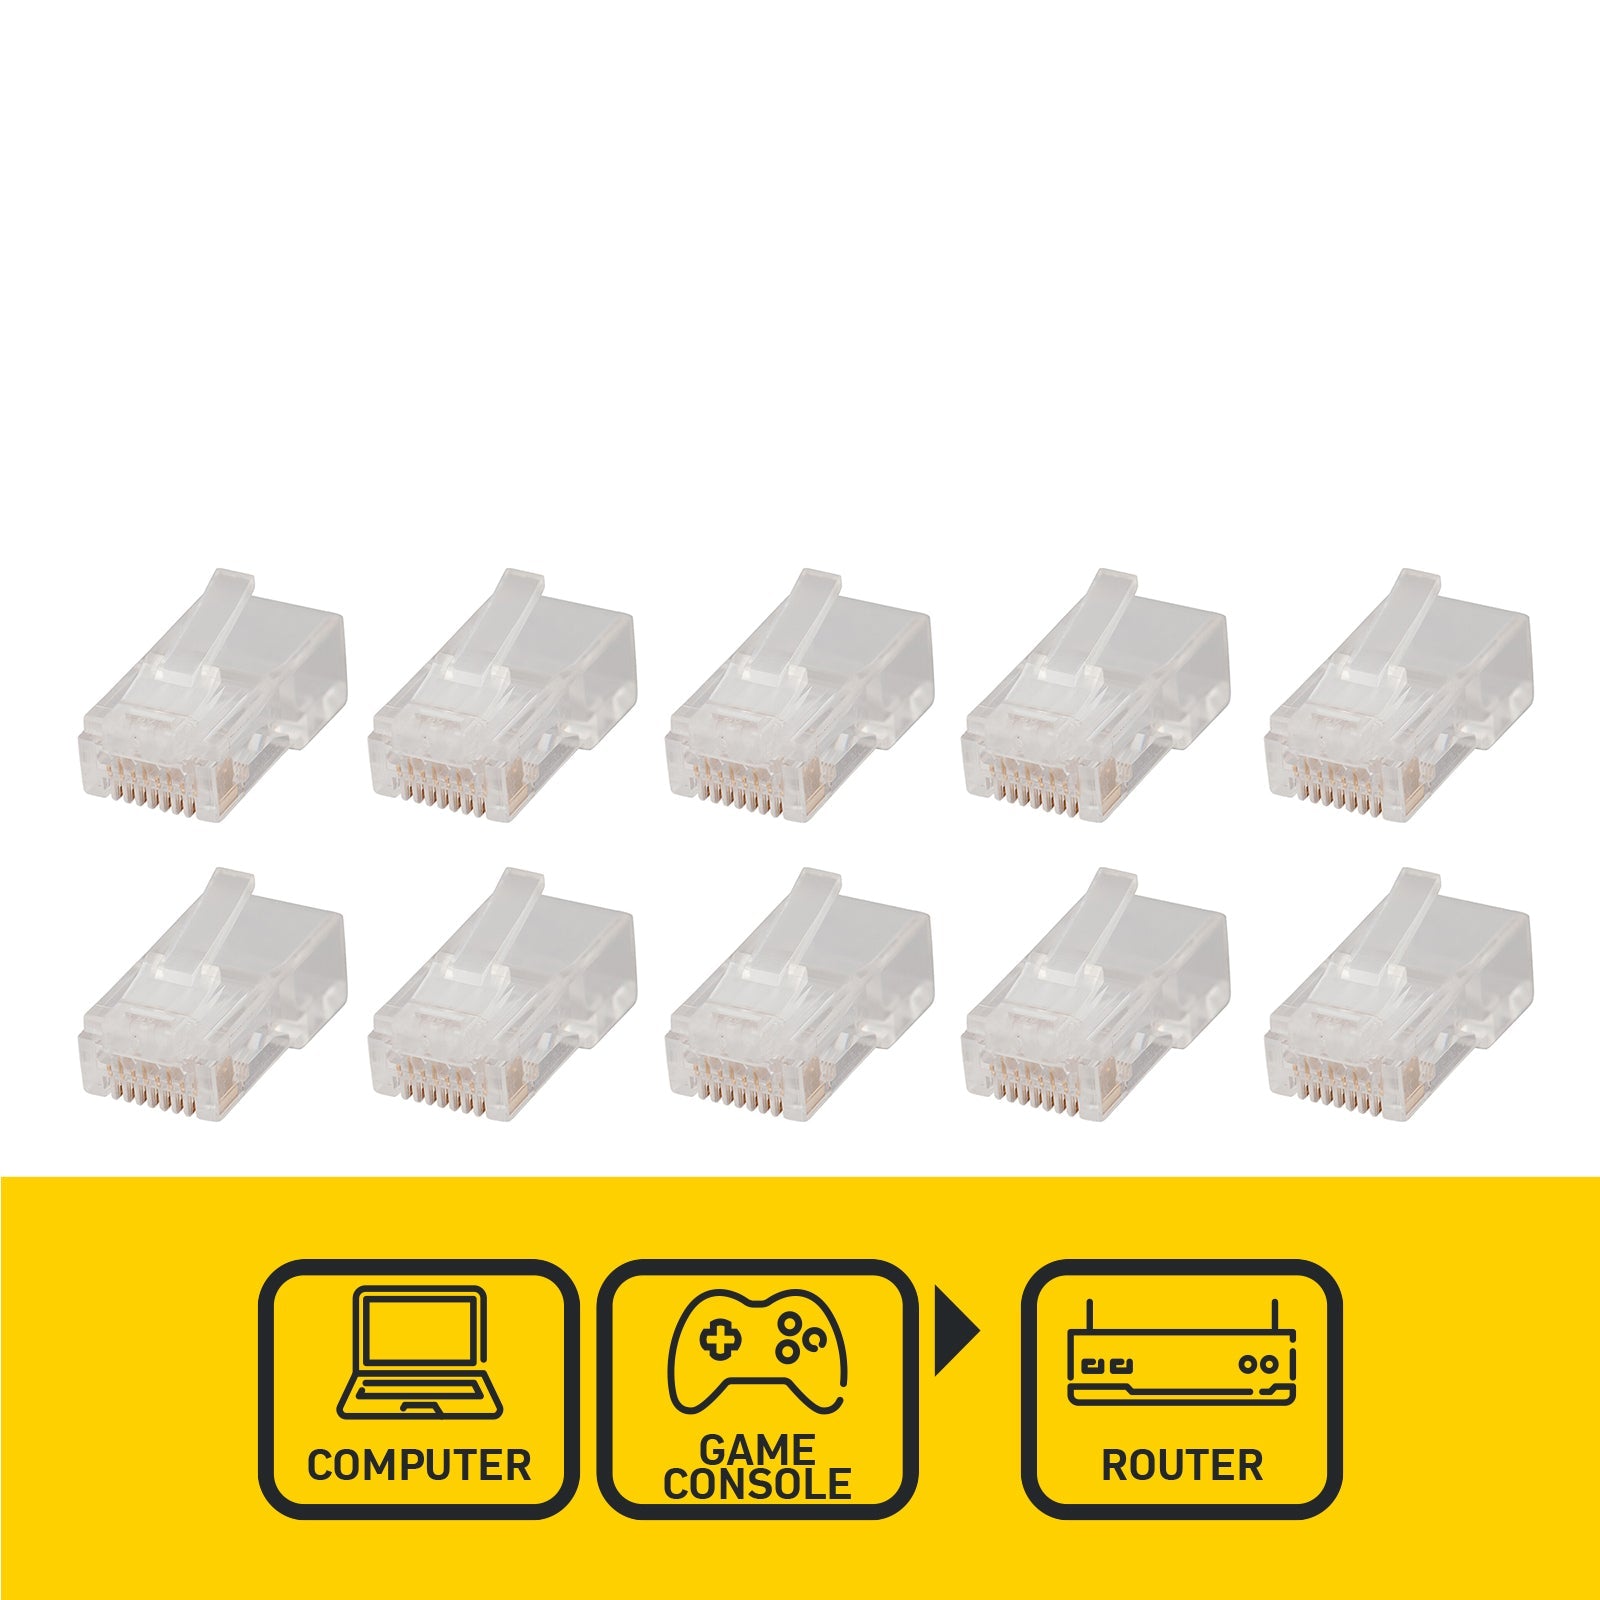 RJ45 Connectors For CAT5 Cable - 10 Pack